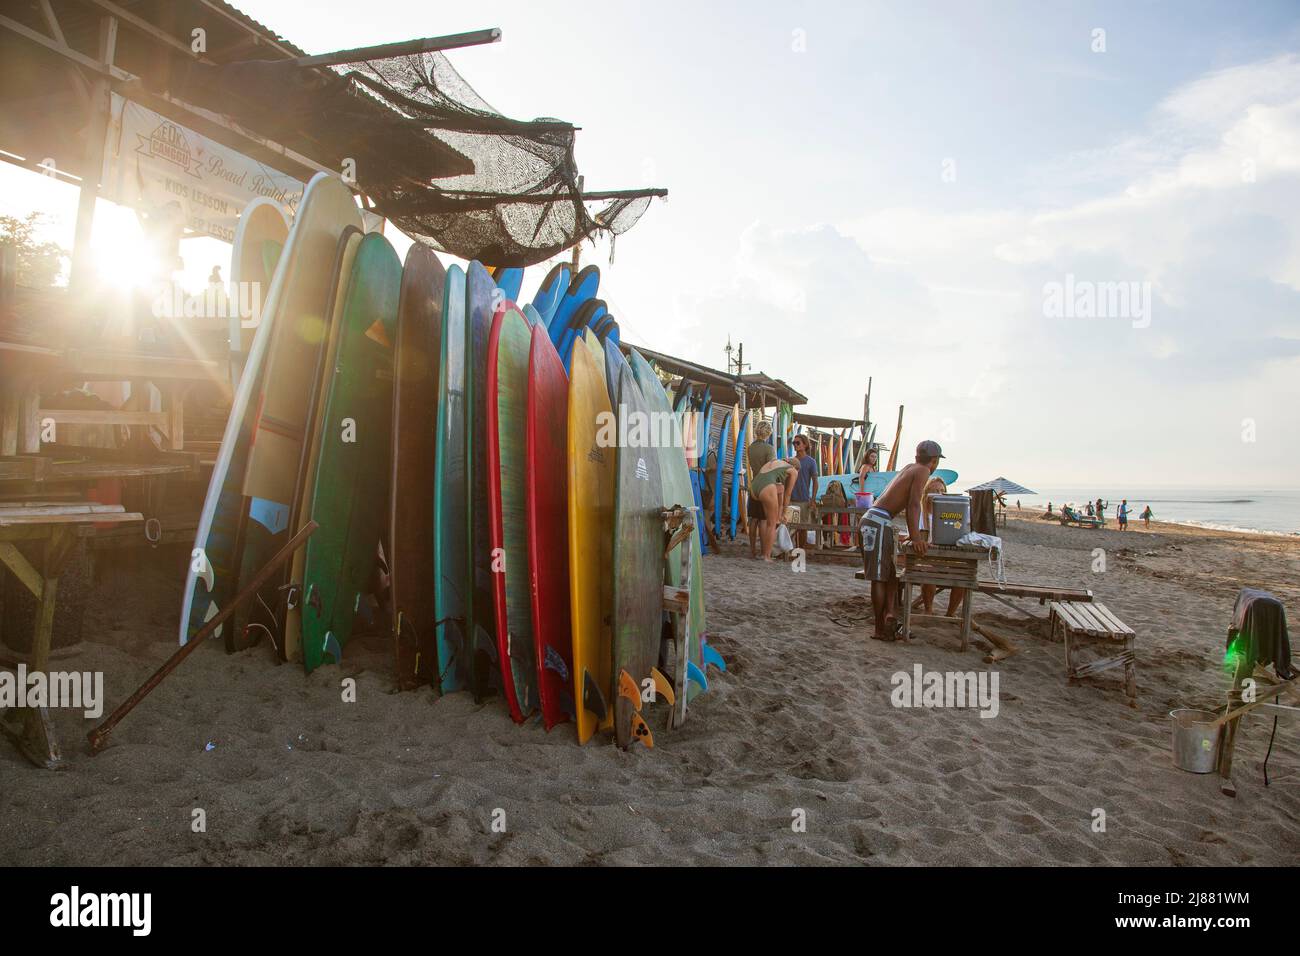 Surfboards for rent at Batu Bolong Beach in Canggu, Bali, Indonesia with longboards, short boards and body boards. Stock Photo